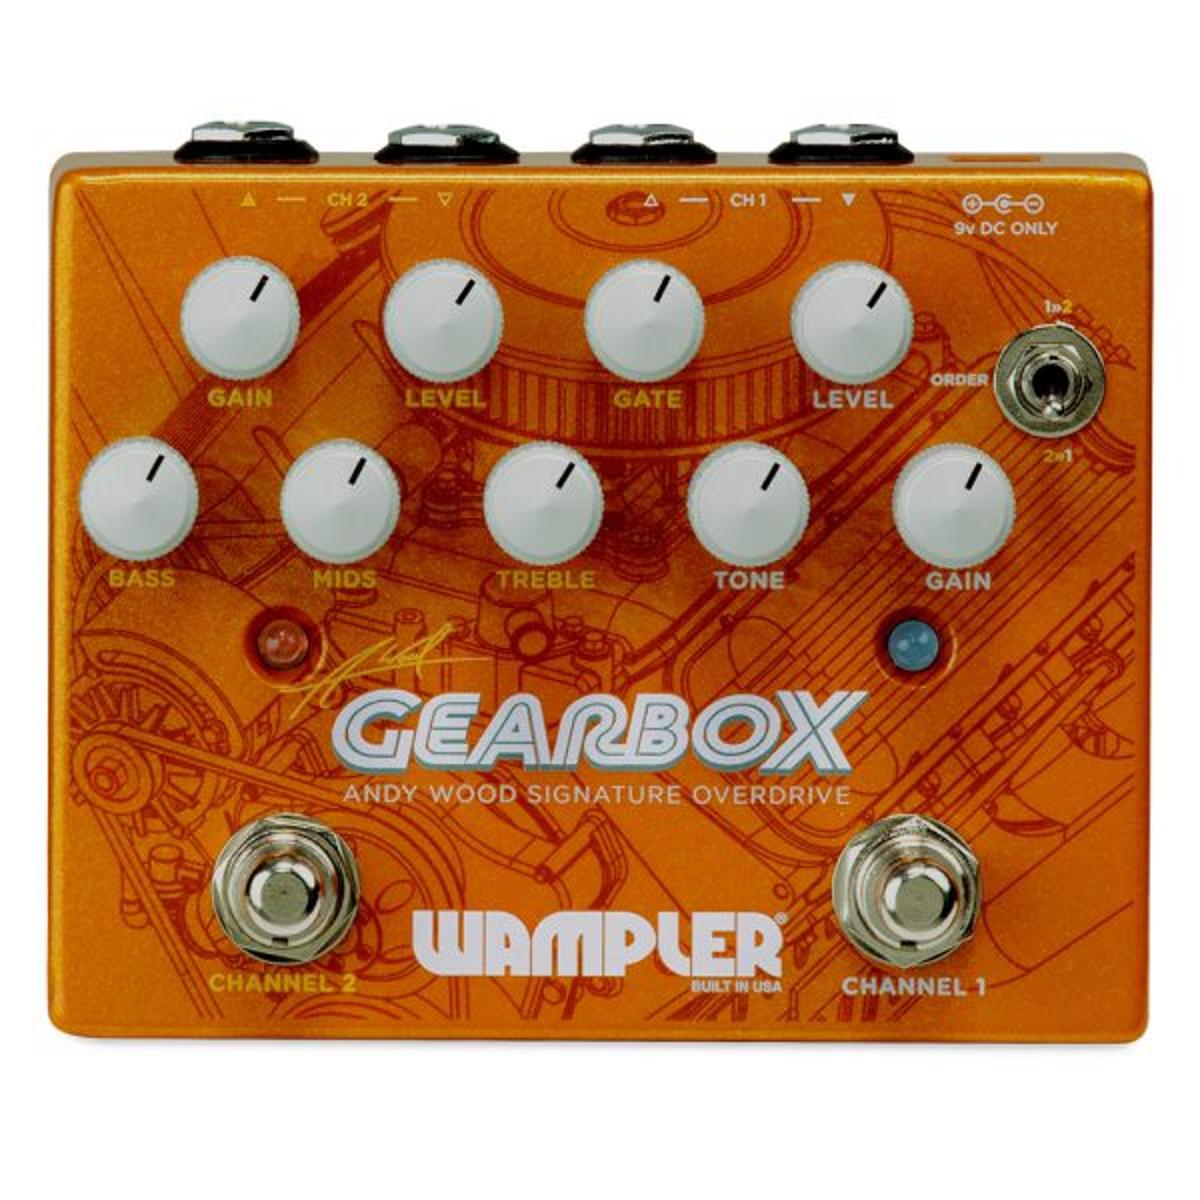 Wampler Gearbox Andy Wood Signature Dual Effects Pedal